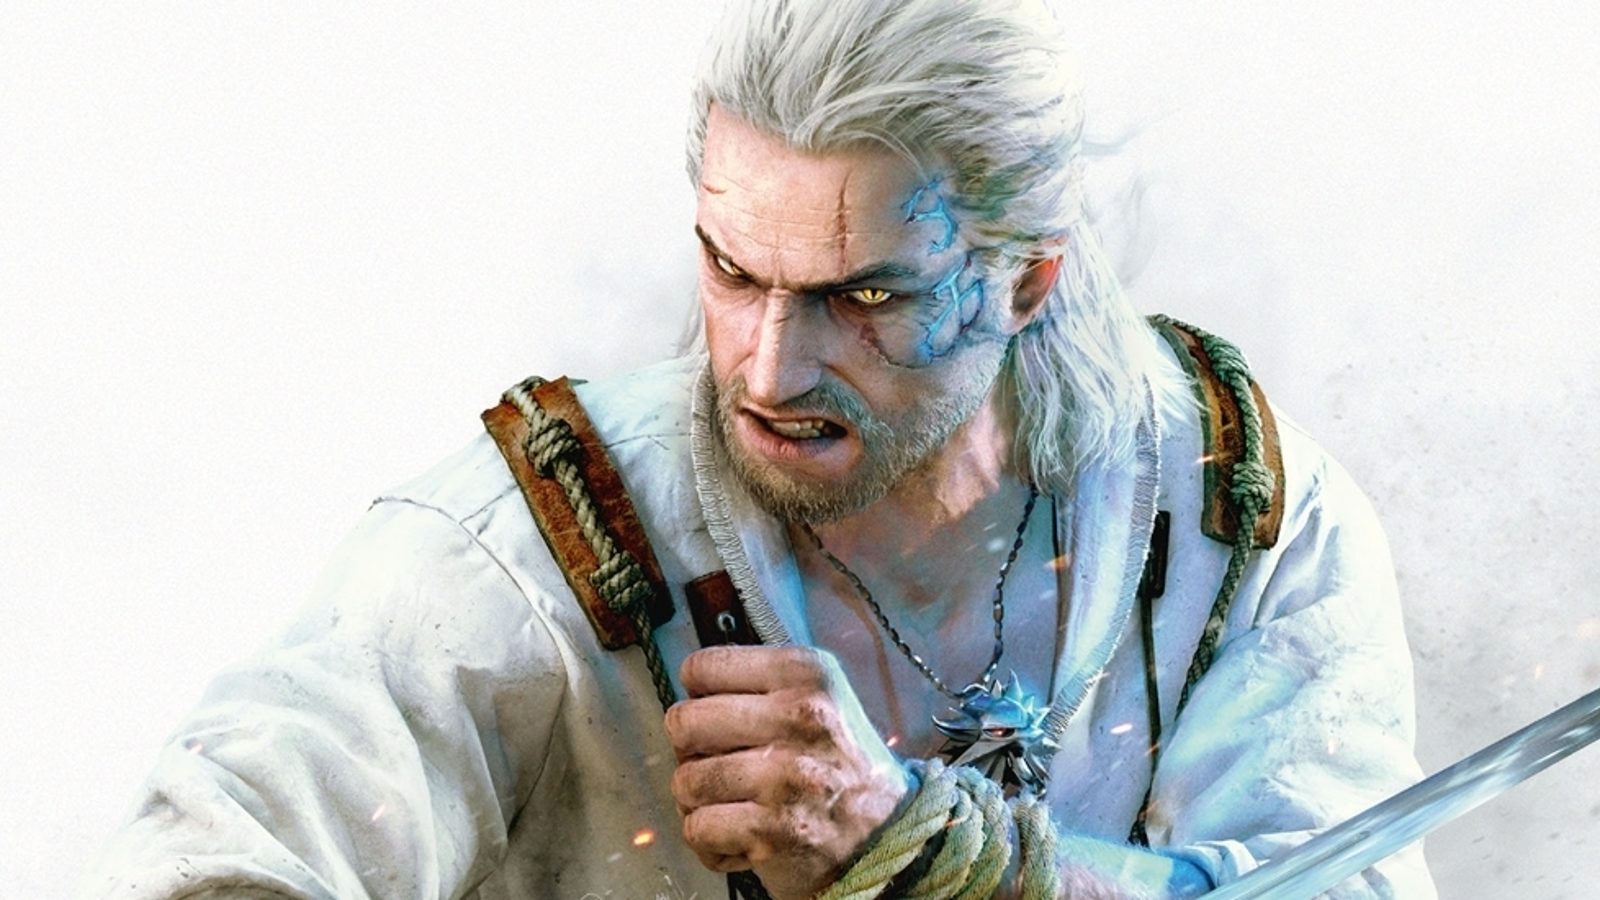 https://assetsio.reedpopcdn.com/digitalfoundry-2020-the-witcher-3-switch-patch-3-6-analysis-1582139339293.jpg?width=1600&height=900&fit=crop&quality=100&format=png&enable=upscale&auto=webp